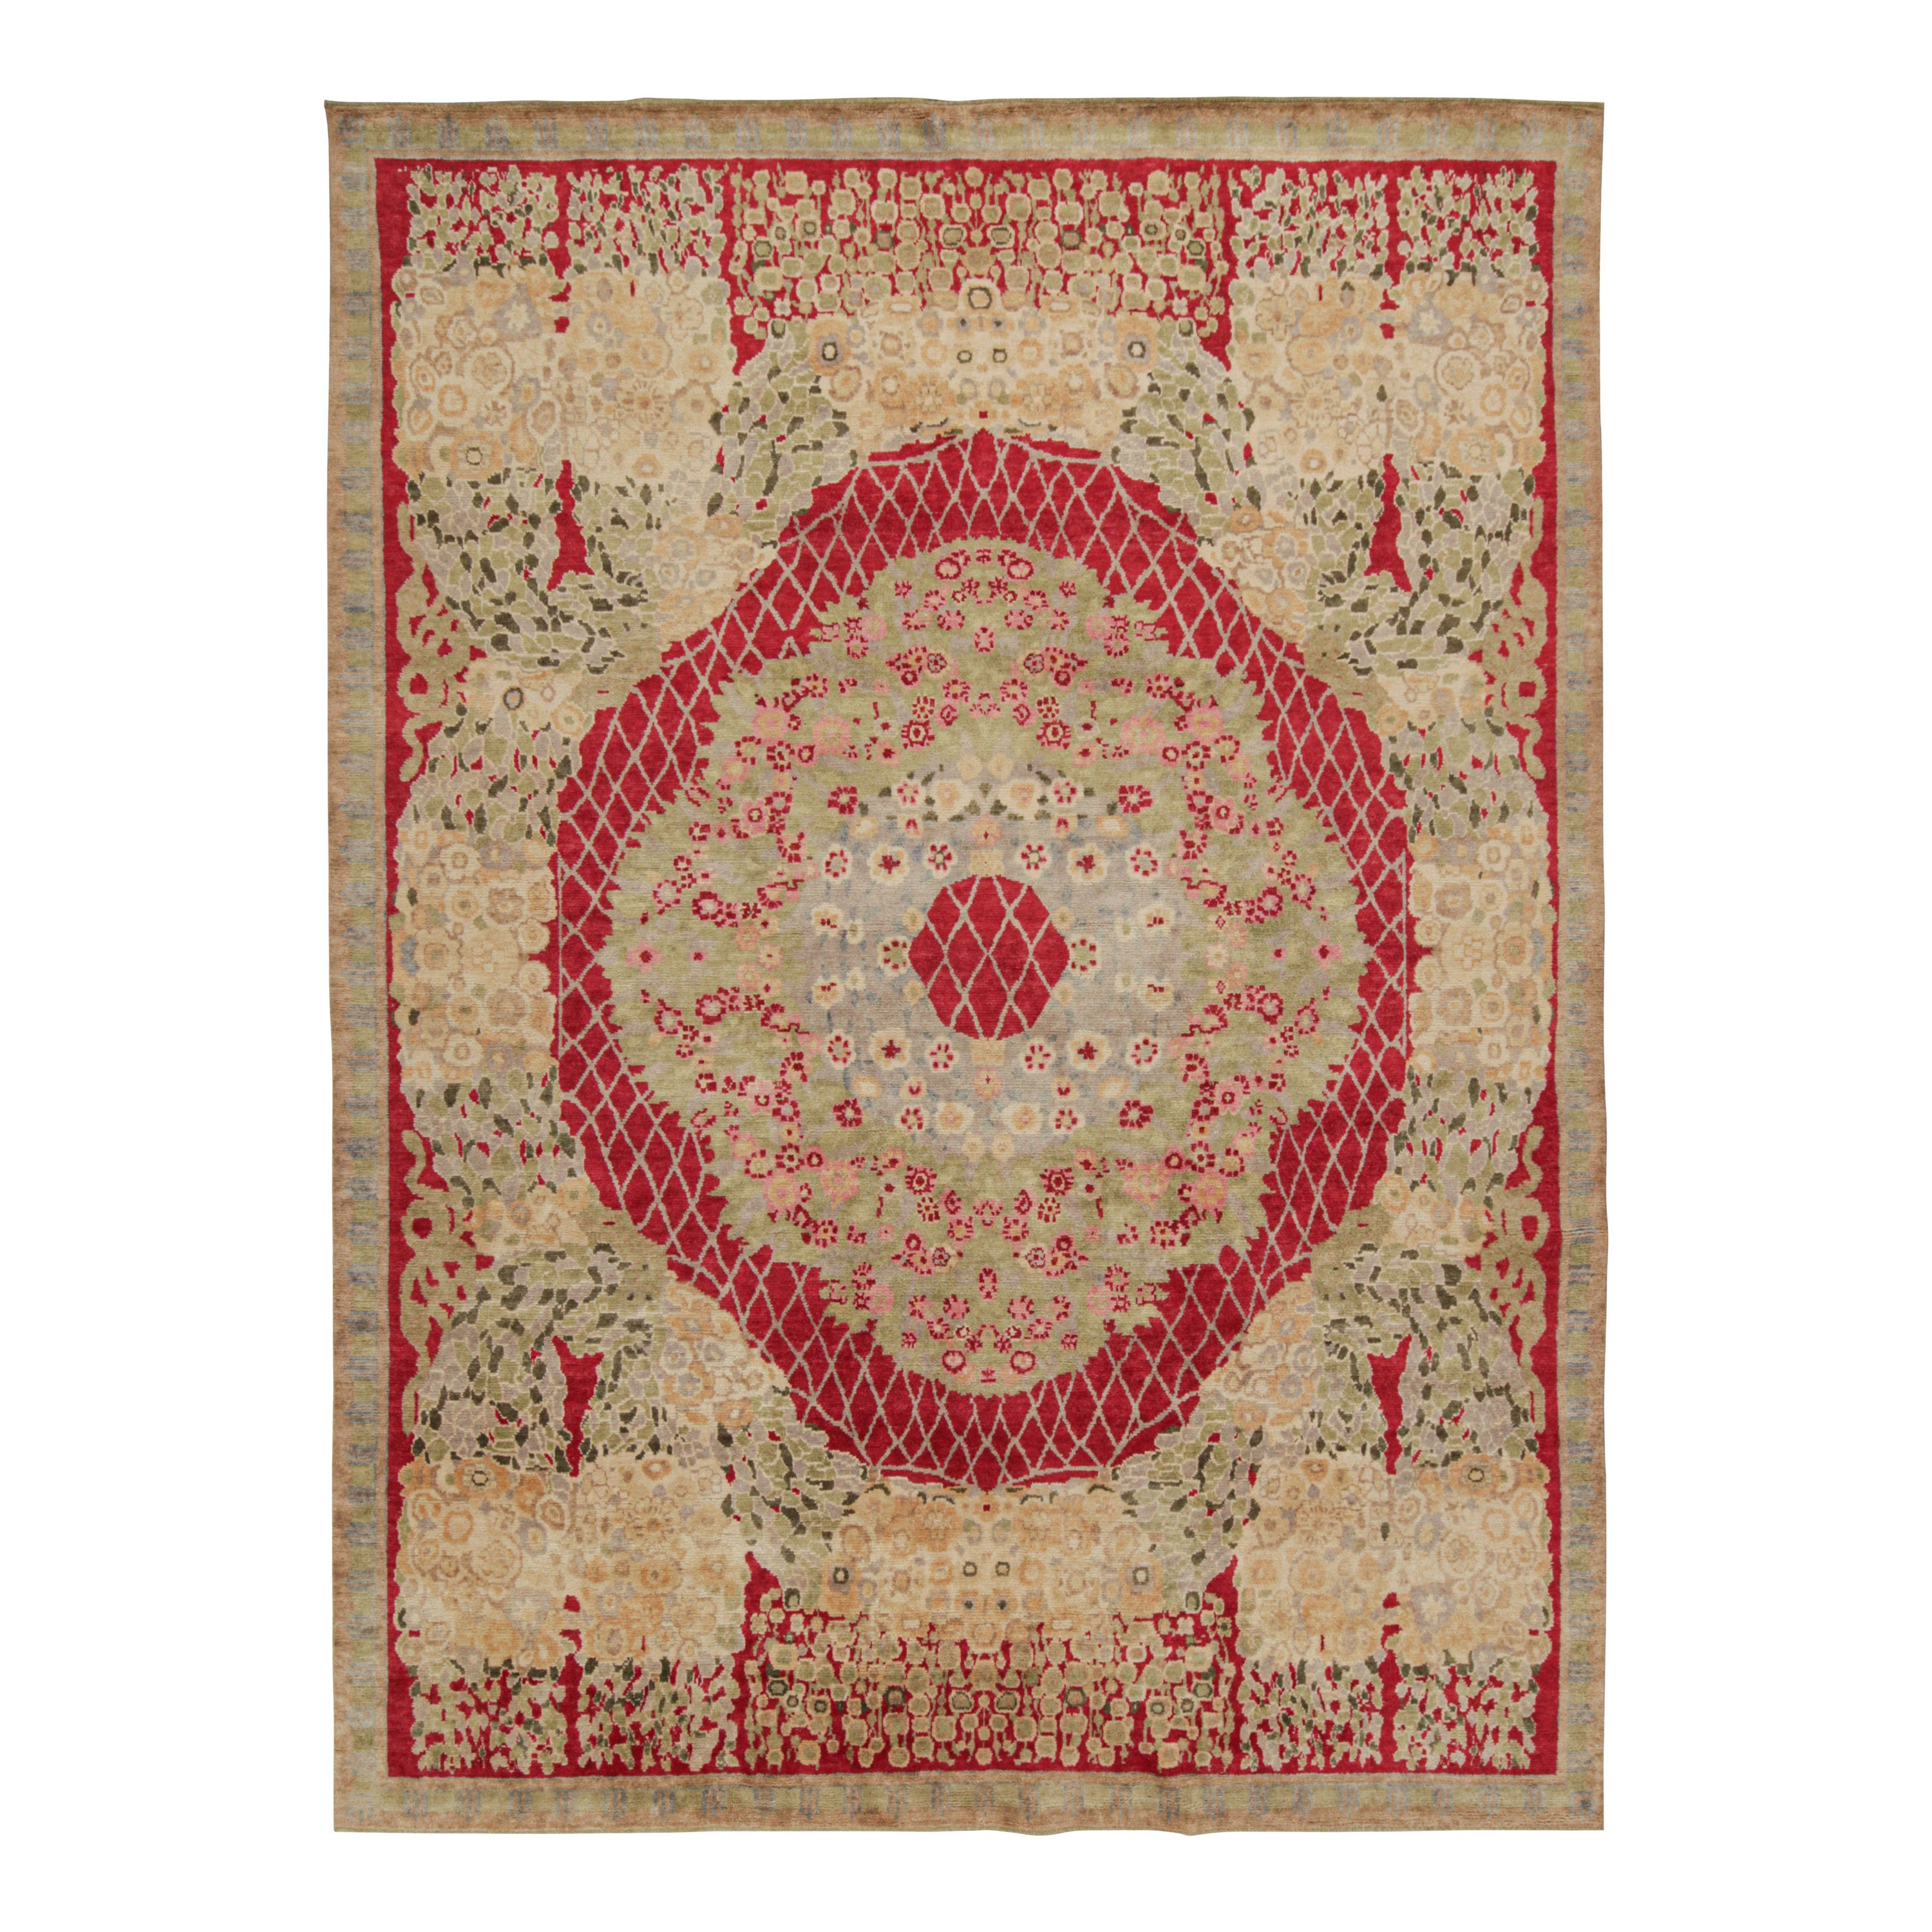 Rug & Kilim’s French Style Art Deco Rug in Red, Green, Gold & Blue Patterns